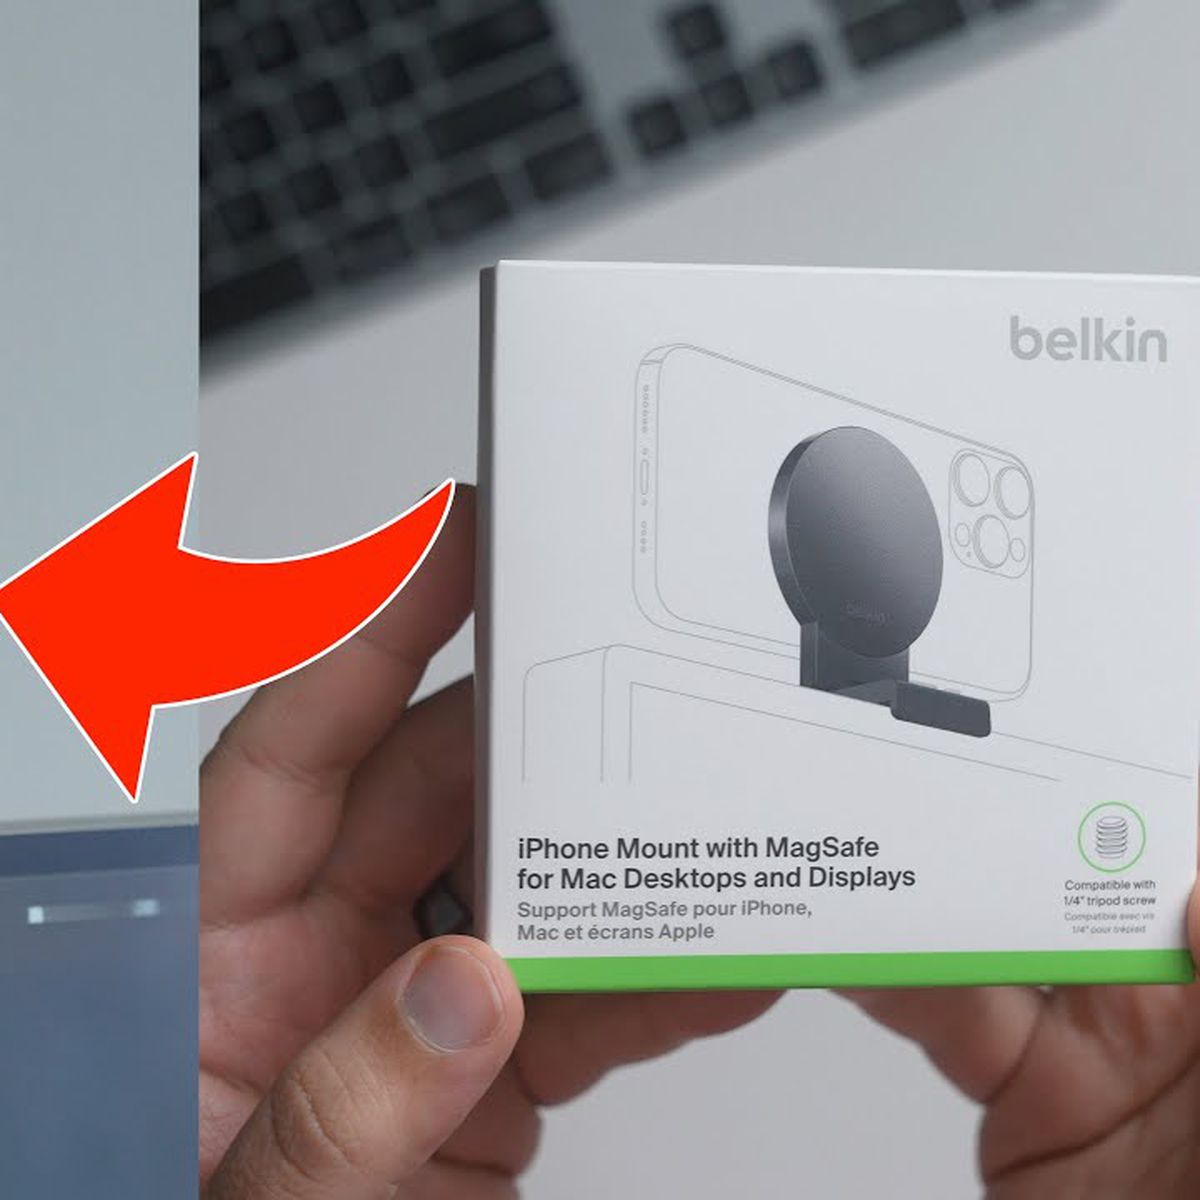 Hands-on: Belkin's iPhone mount for desktop Mac displays is a secret tripod  mount with MagSafe - 9to5Mac